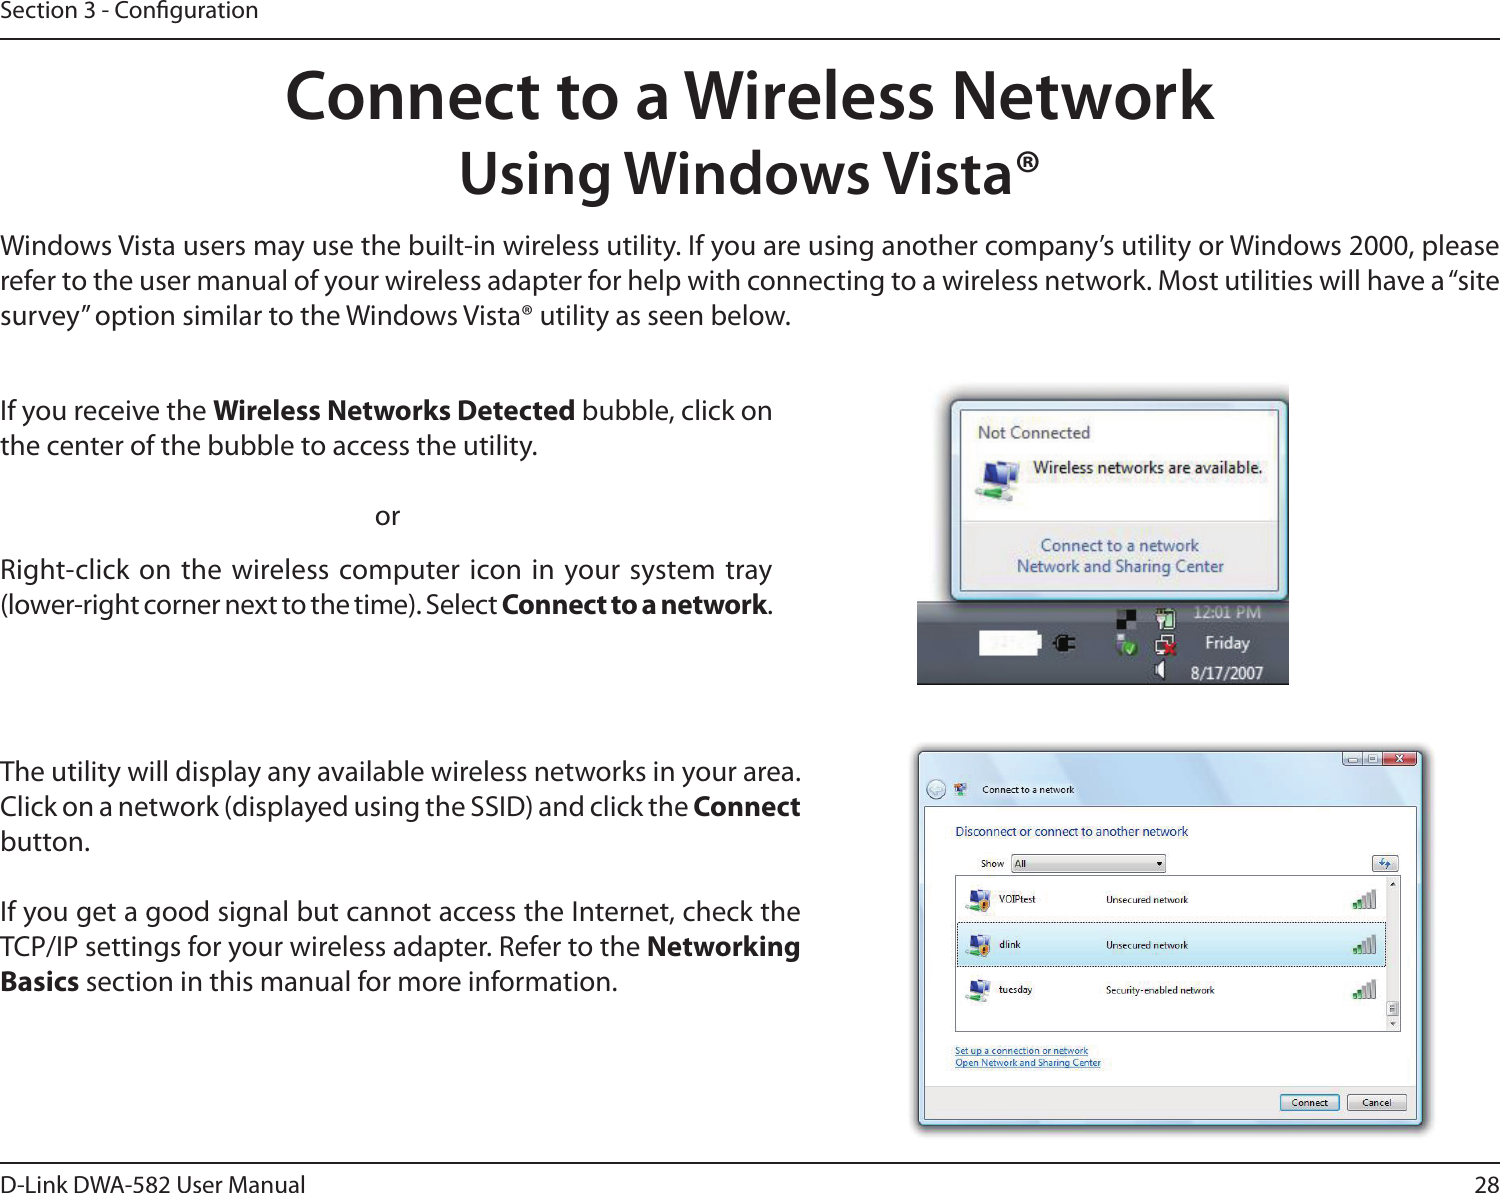 28D-Link DWA-582 User ManualSection 3 - CongurationConnect to a Wireless NetworkUsing Windows Vista®Windows Vista users may use the built-in wireless utility. If you are using another company’s utility or Windows 2000, please refer to the user manual of your wireless adapter for help with connecting to a wireless network. Most utilities will have a “site survey” option similar to the Windows Vista® utility as seen below.Right-click on the wireless computer icon in your system tray (lower-right corner next to the time). Select Connect to a network.If you receive the Wireless Networks Detected bubble, click on the center of the bubble to access the utility.     orThe utility will display any available wireless networks in your area. Click on a network (displayed using the SSID) and click the Connect button.If you get a good signal but cannot access the Internet, check the TCP/IP settings for your wireless adapter. Refer to the Networking Basics section in this manual for more information.